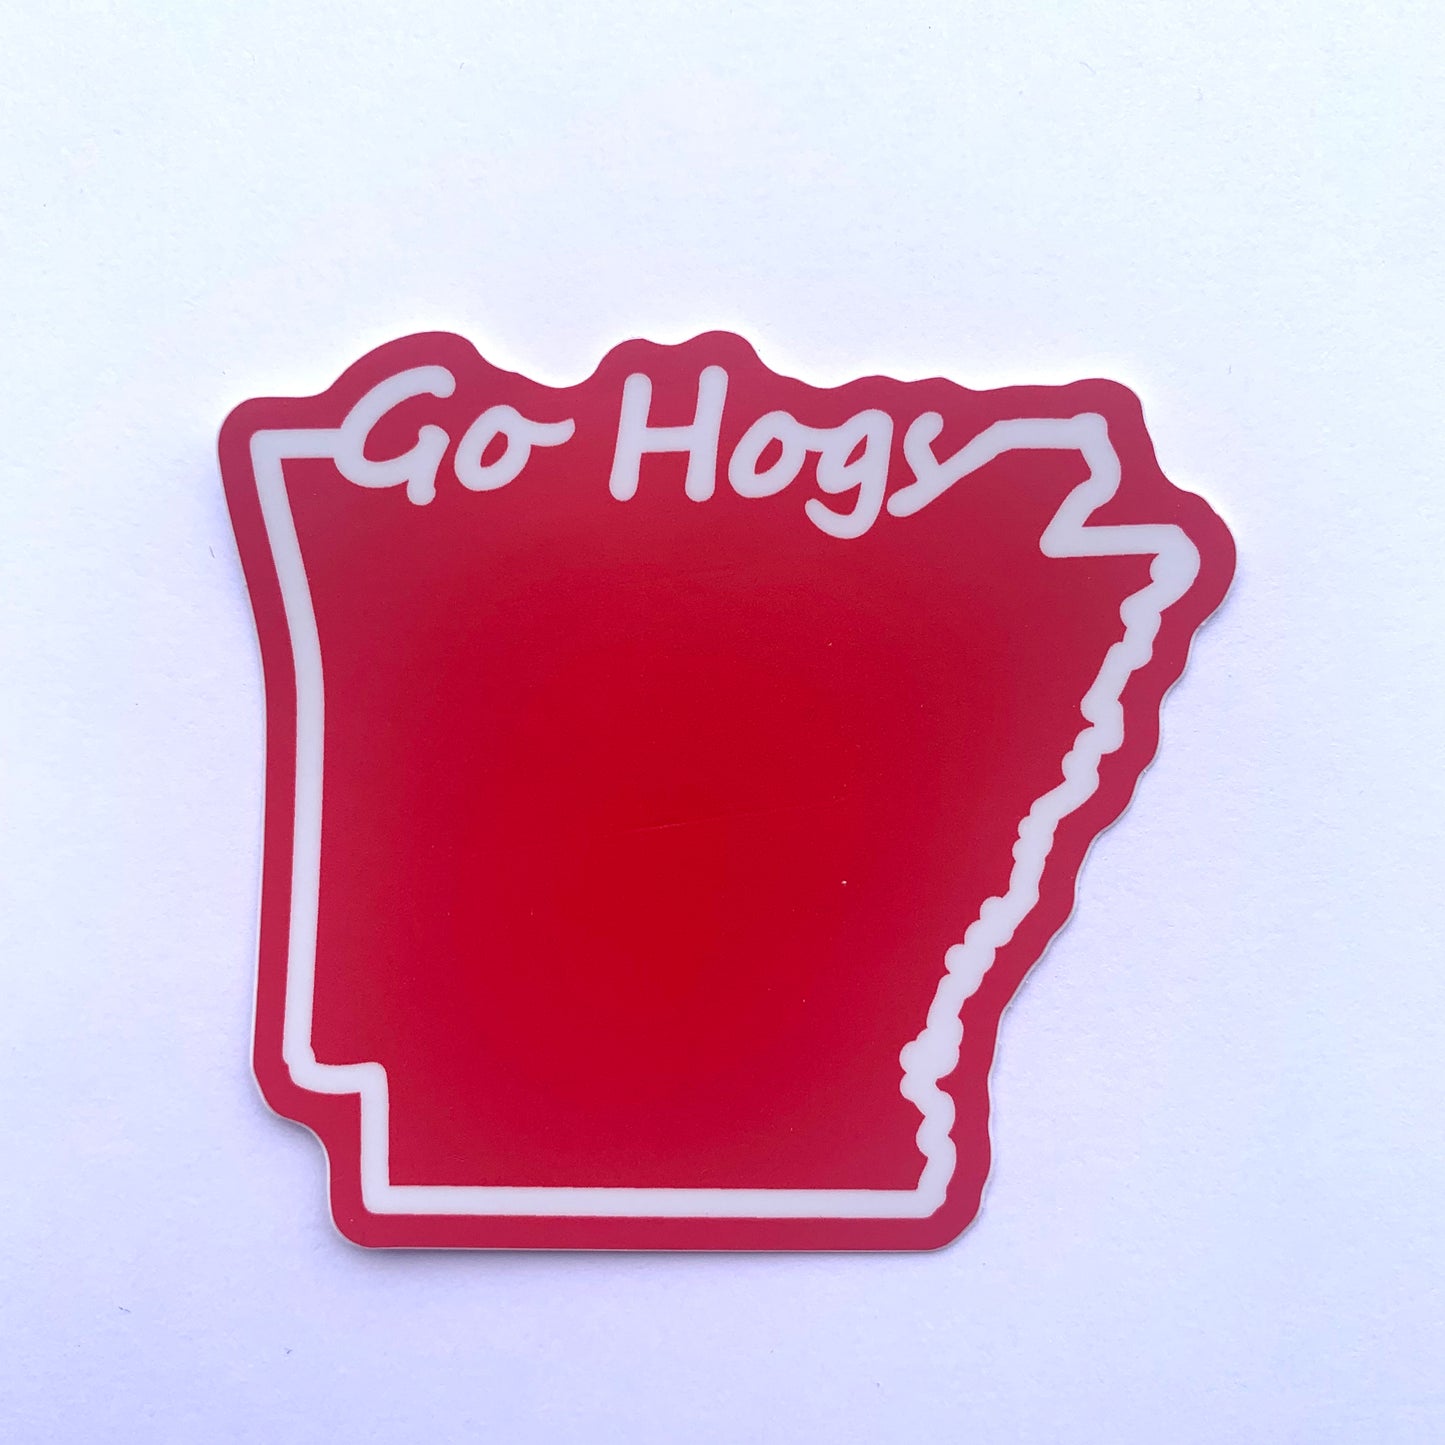 go hogs sticker is red with white outline of the state of arkansas on a white background